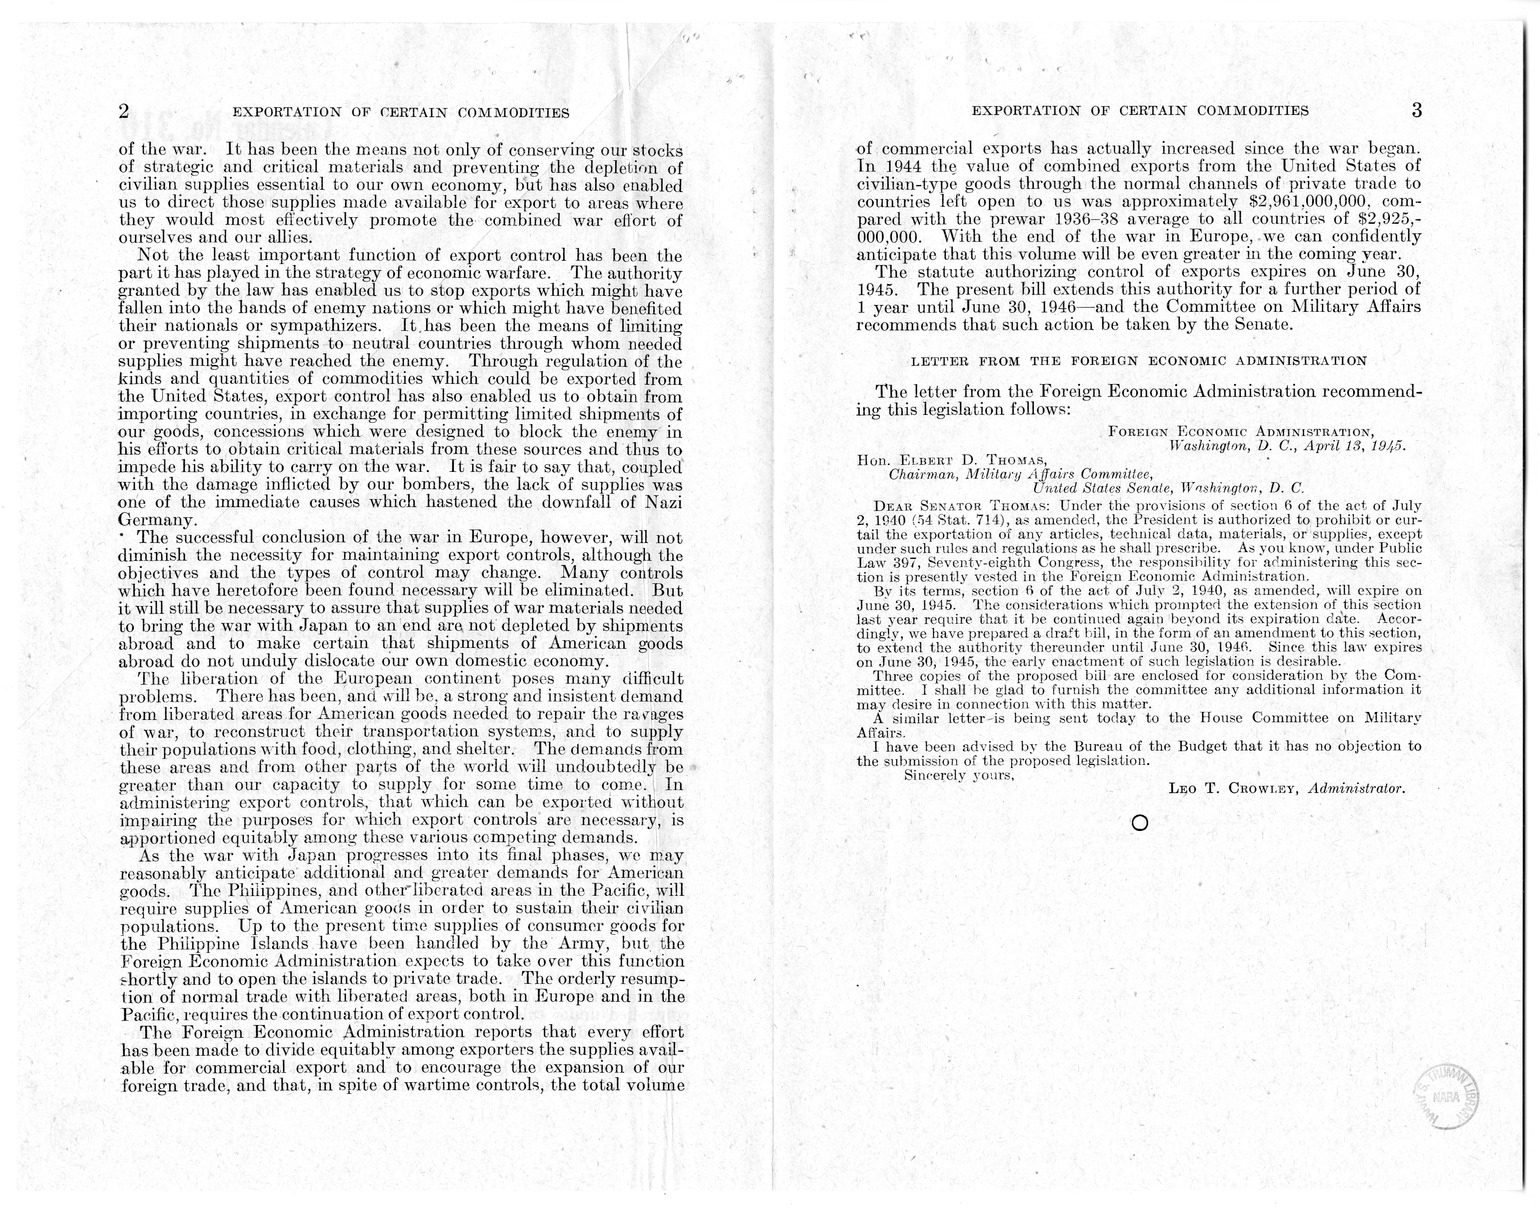 Memorandum from Harold D. Smith to M. C. Latta, H.R. 2944, To Continue in Effect Section 6 of the Act of July 2, 1940 (54 Stat. 714), as Amended, Relating to the Exportation of Certain Commodities, with Attachments